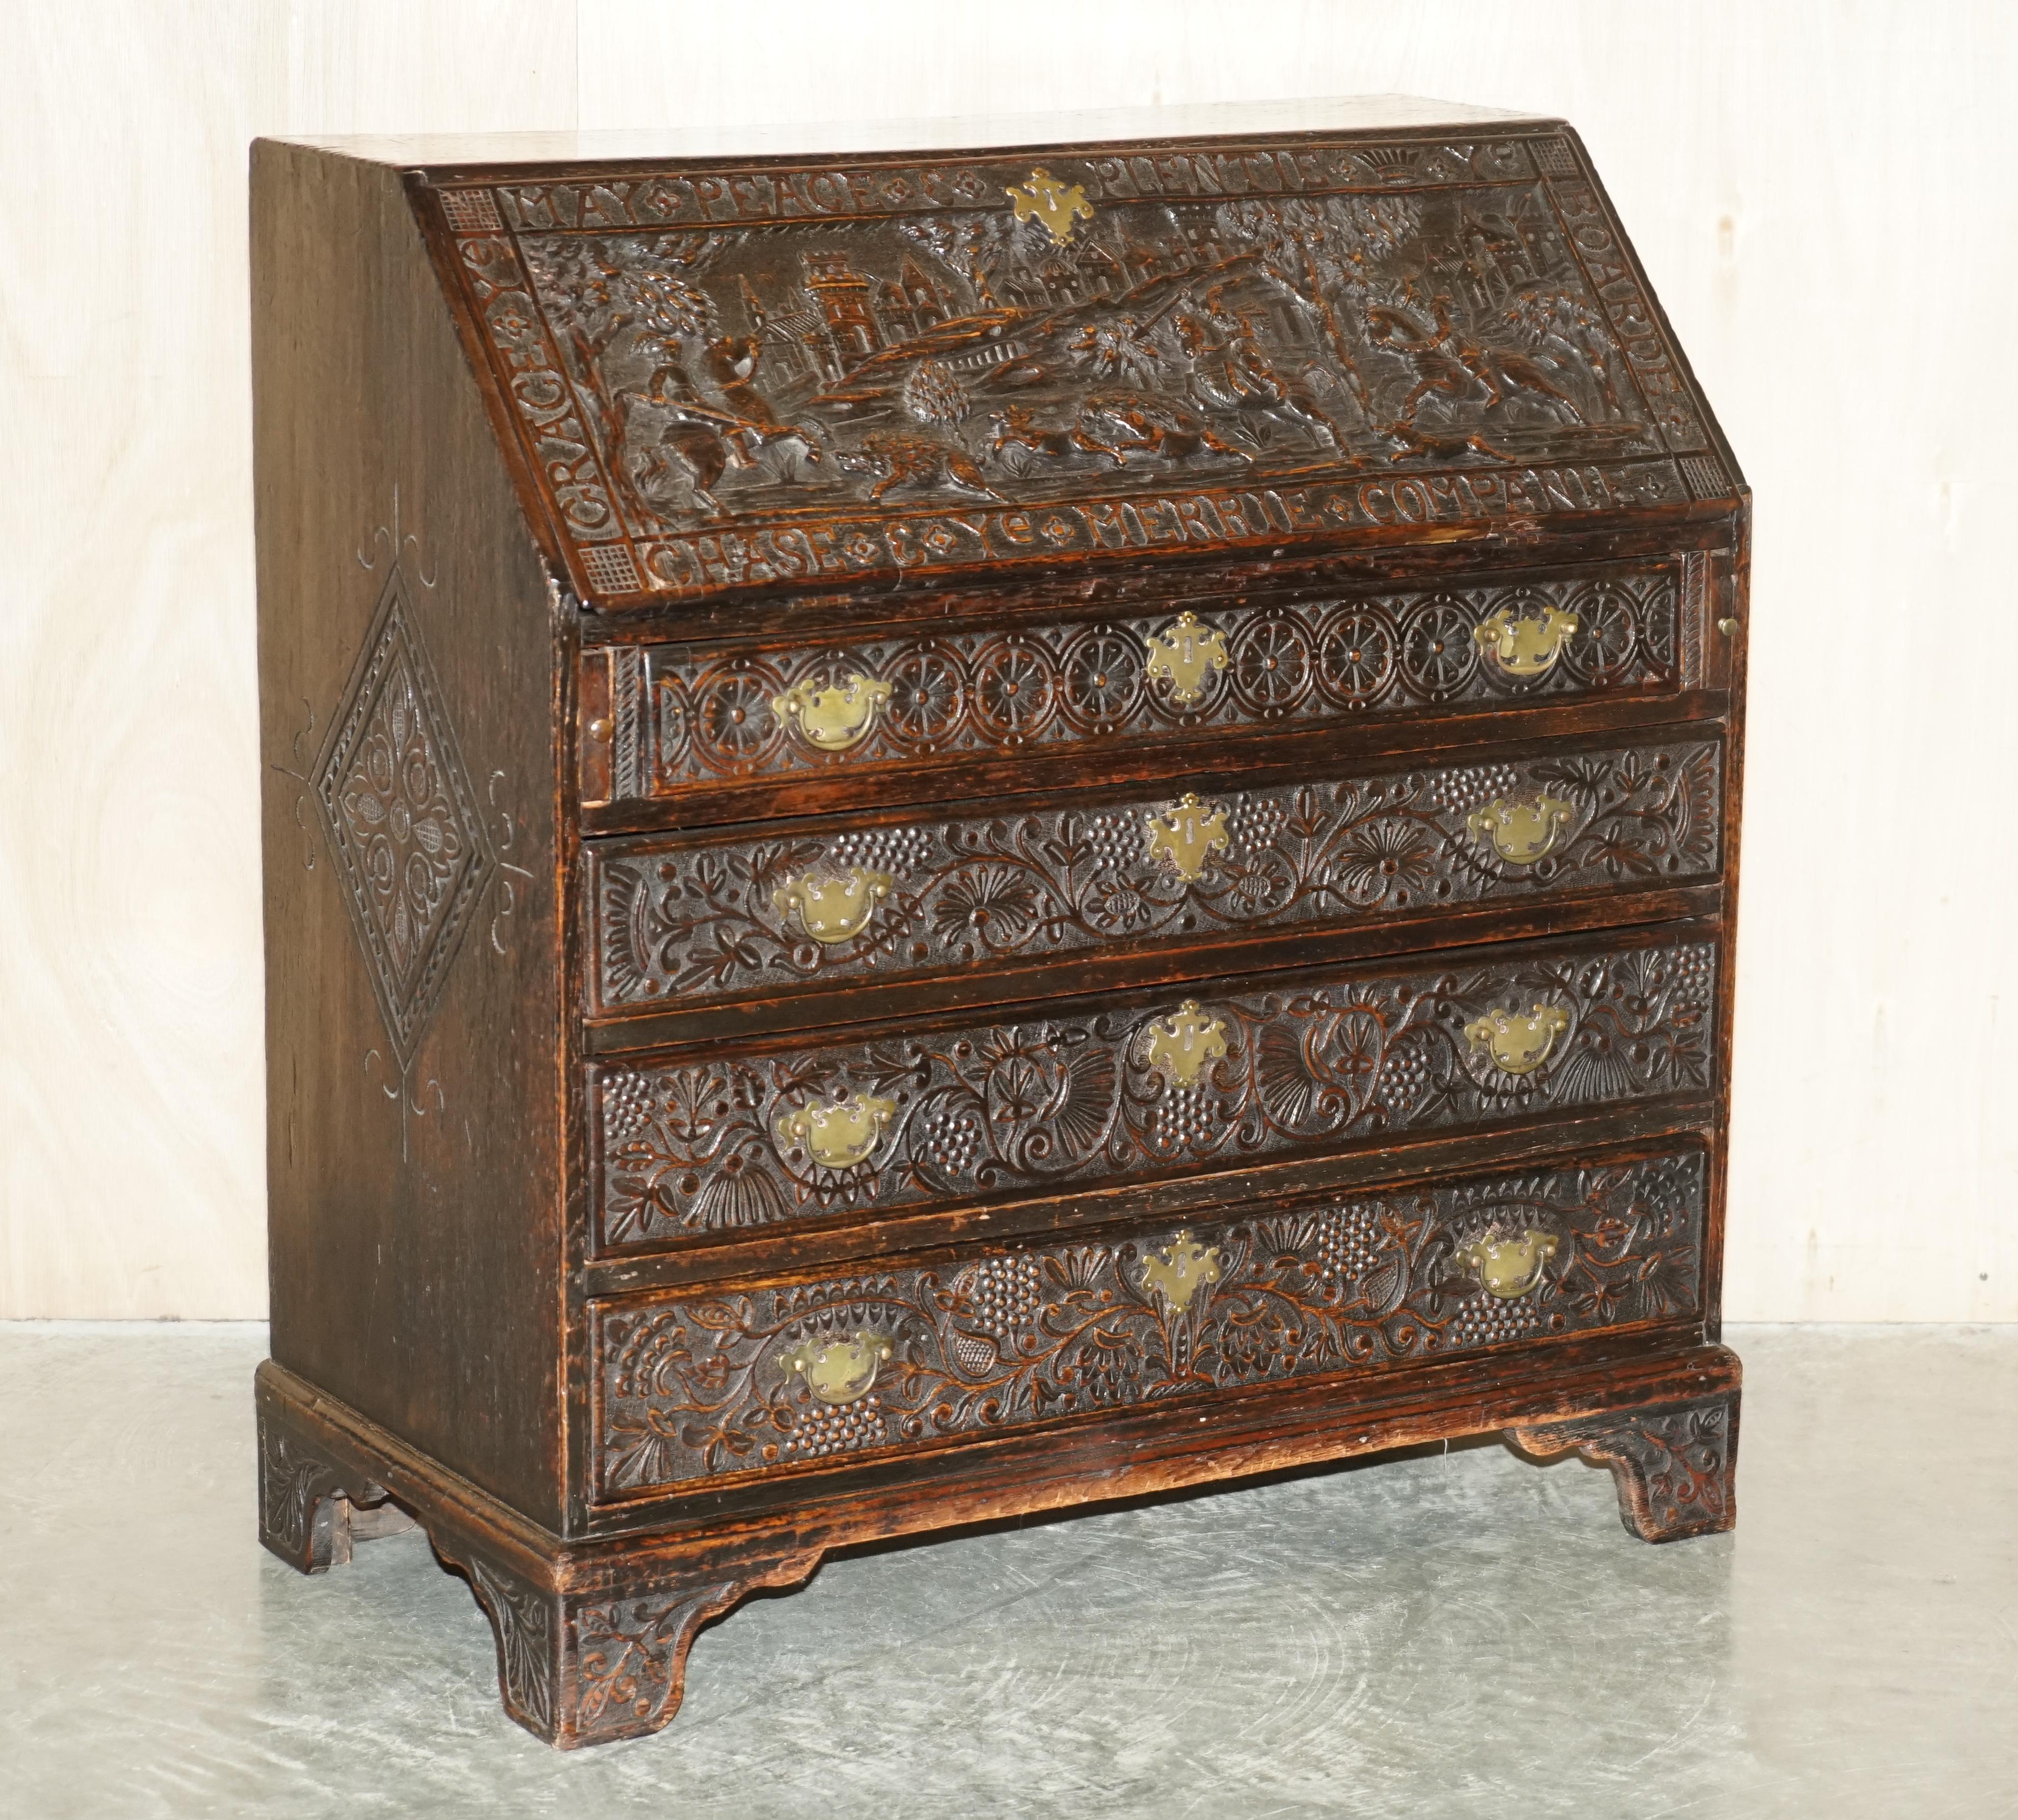 We are delighted to offer for sale this very rare and highly collectable, ornately carved, circa 1780 Jacobean revival, Antique Library Bureau 

What a piece! Hand carved from every single angle, the bureau front has very old English writing all